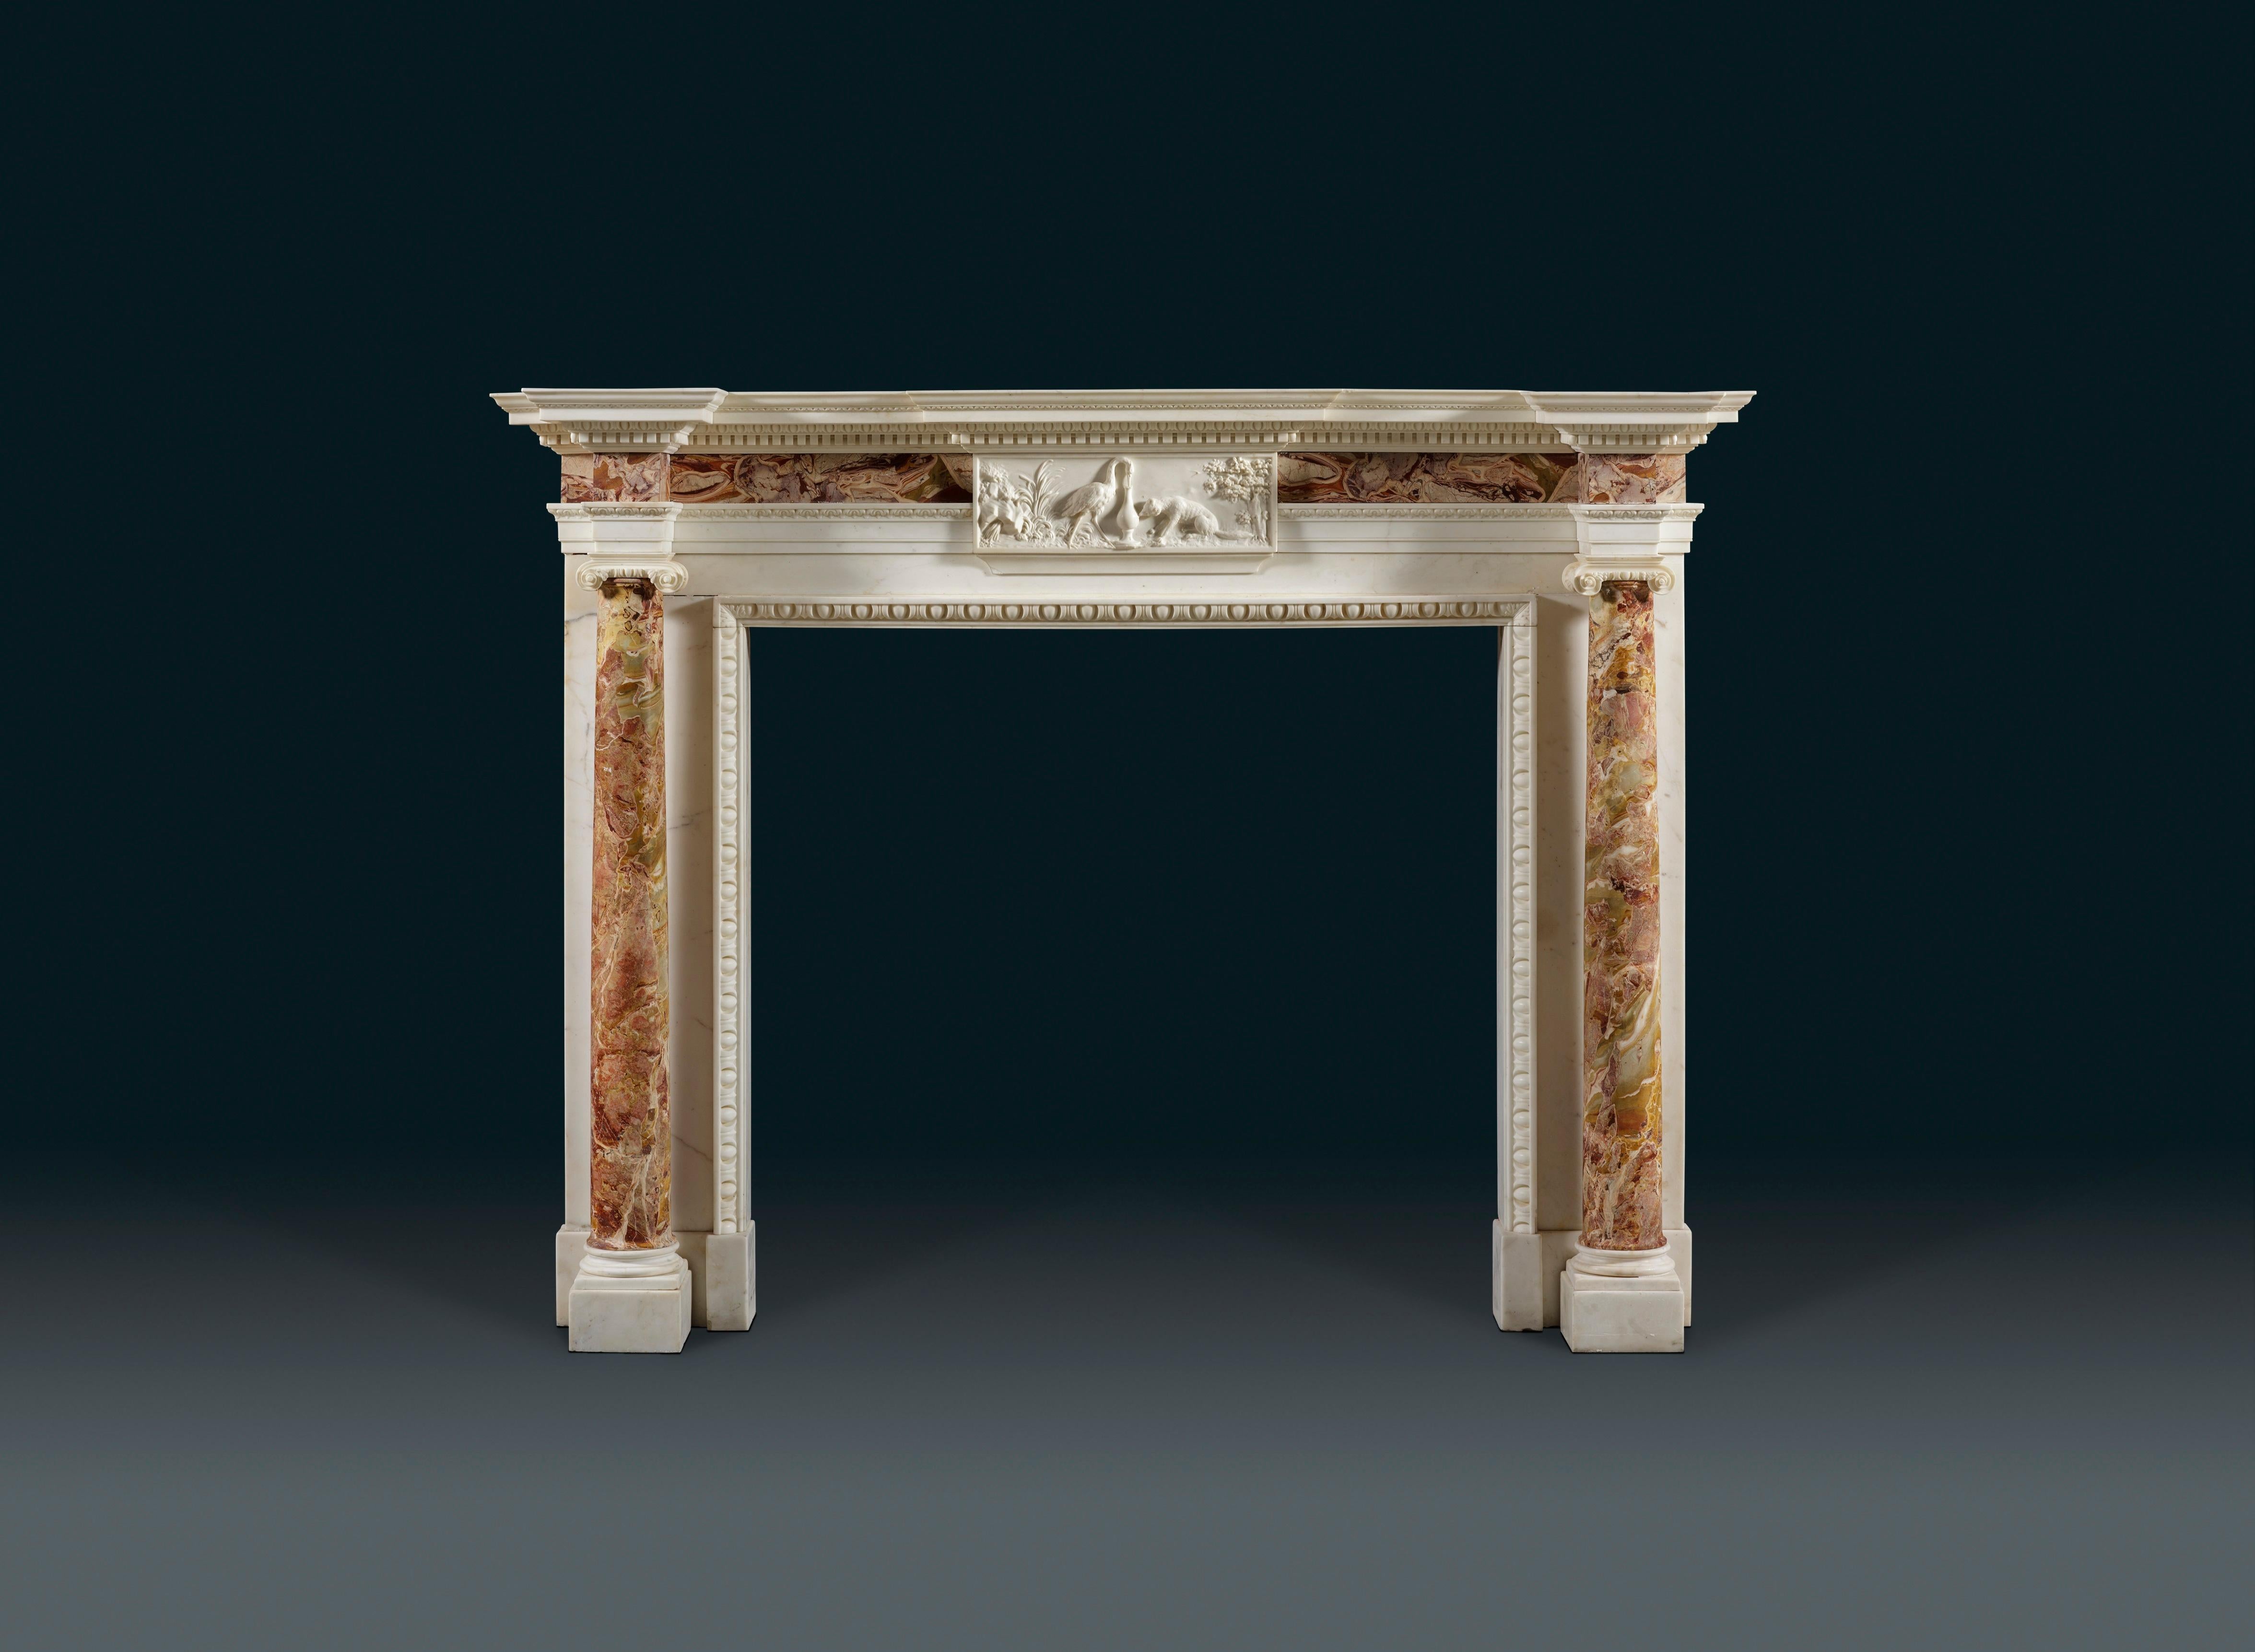 A mid-18th century, George II, white statuary and Sicilian Jasper marble chimneypiece by Thomas Carter I, (1702-1756.) The jambs in the form of full rounded Jasper columns, the frieze with a centre tablet illustrating Aesop’s ‘Stork and Fox’ fable,